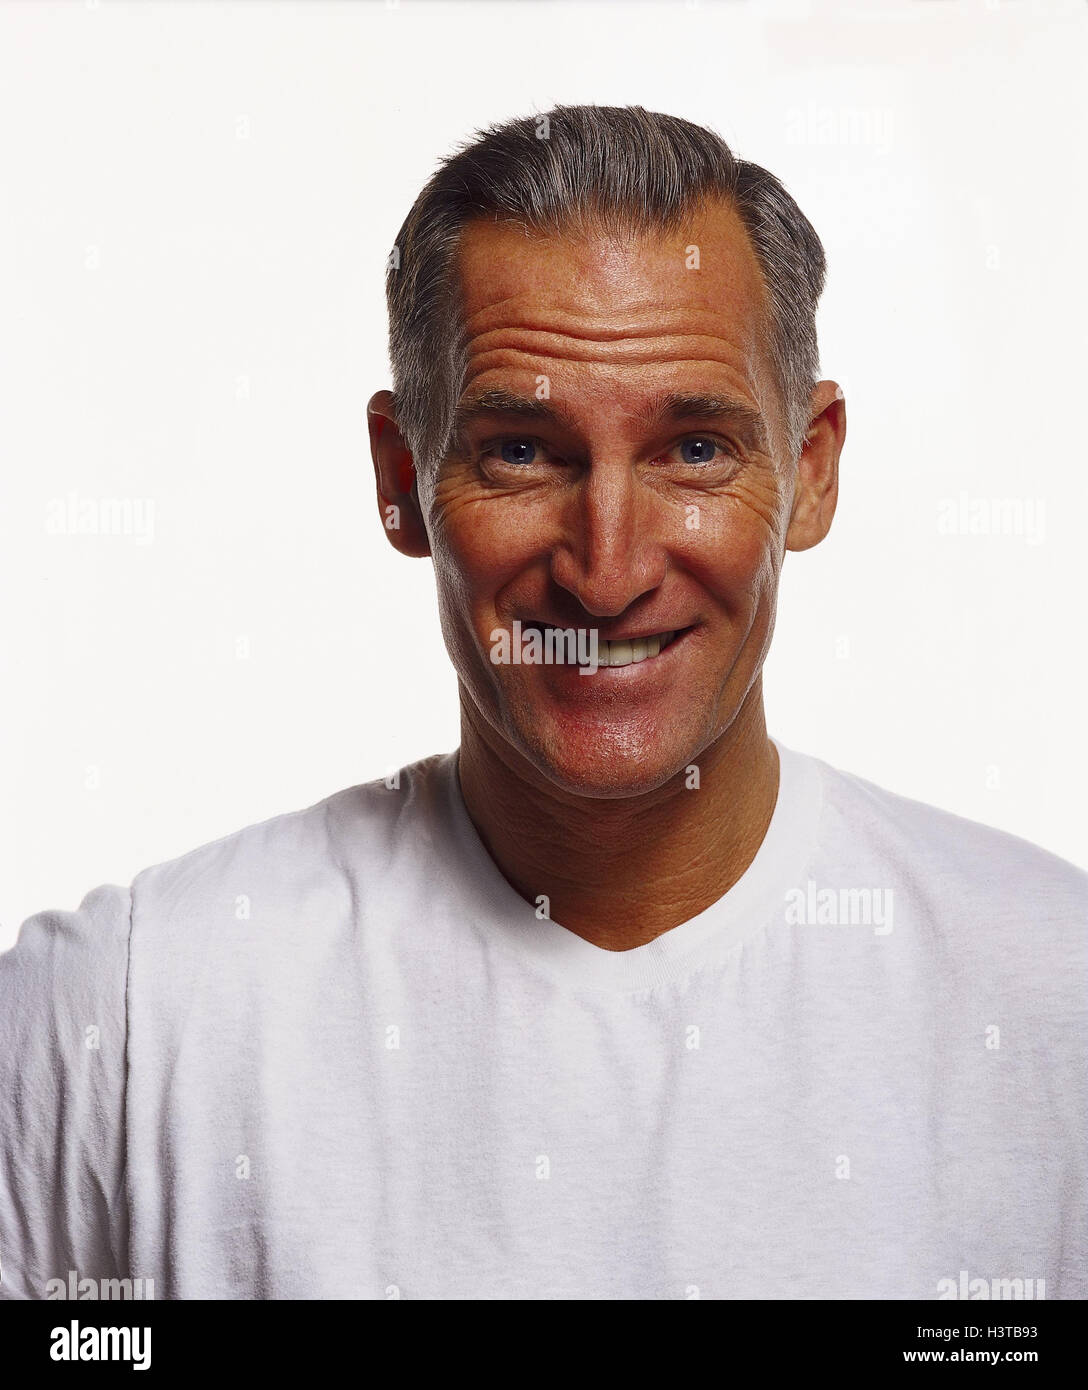 Man, middle old person, T-shirt, white, smile, portrait, Men, man's portrait, forehead, wrinkle, happy, grin, interrogatorily, cheerfully, in a good mood, funnily, cut outs, studio, near, Stock Photo